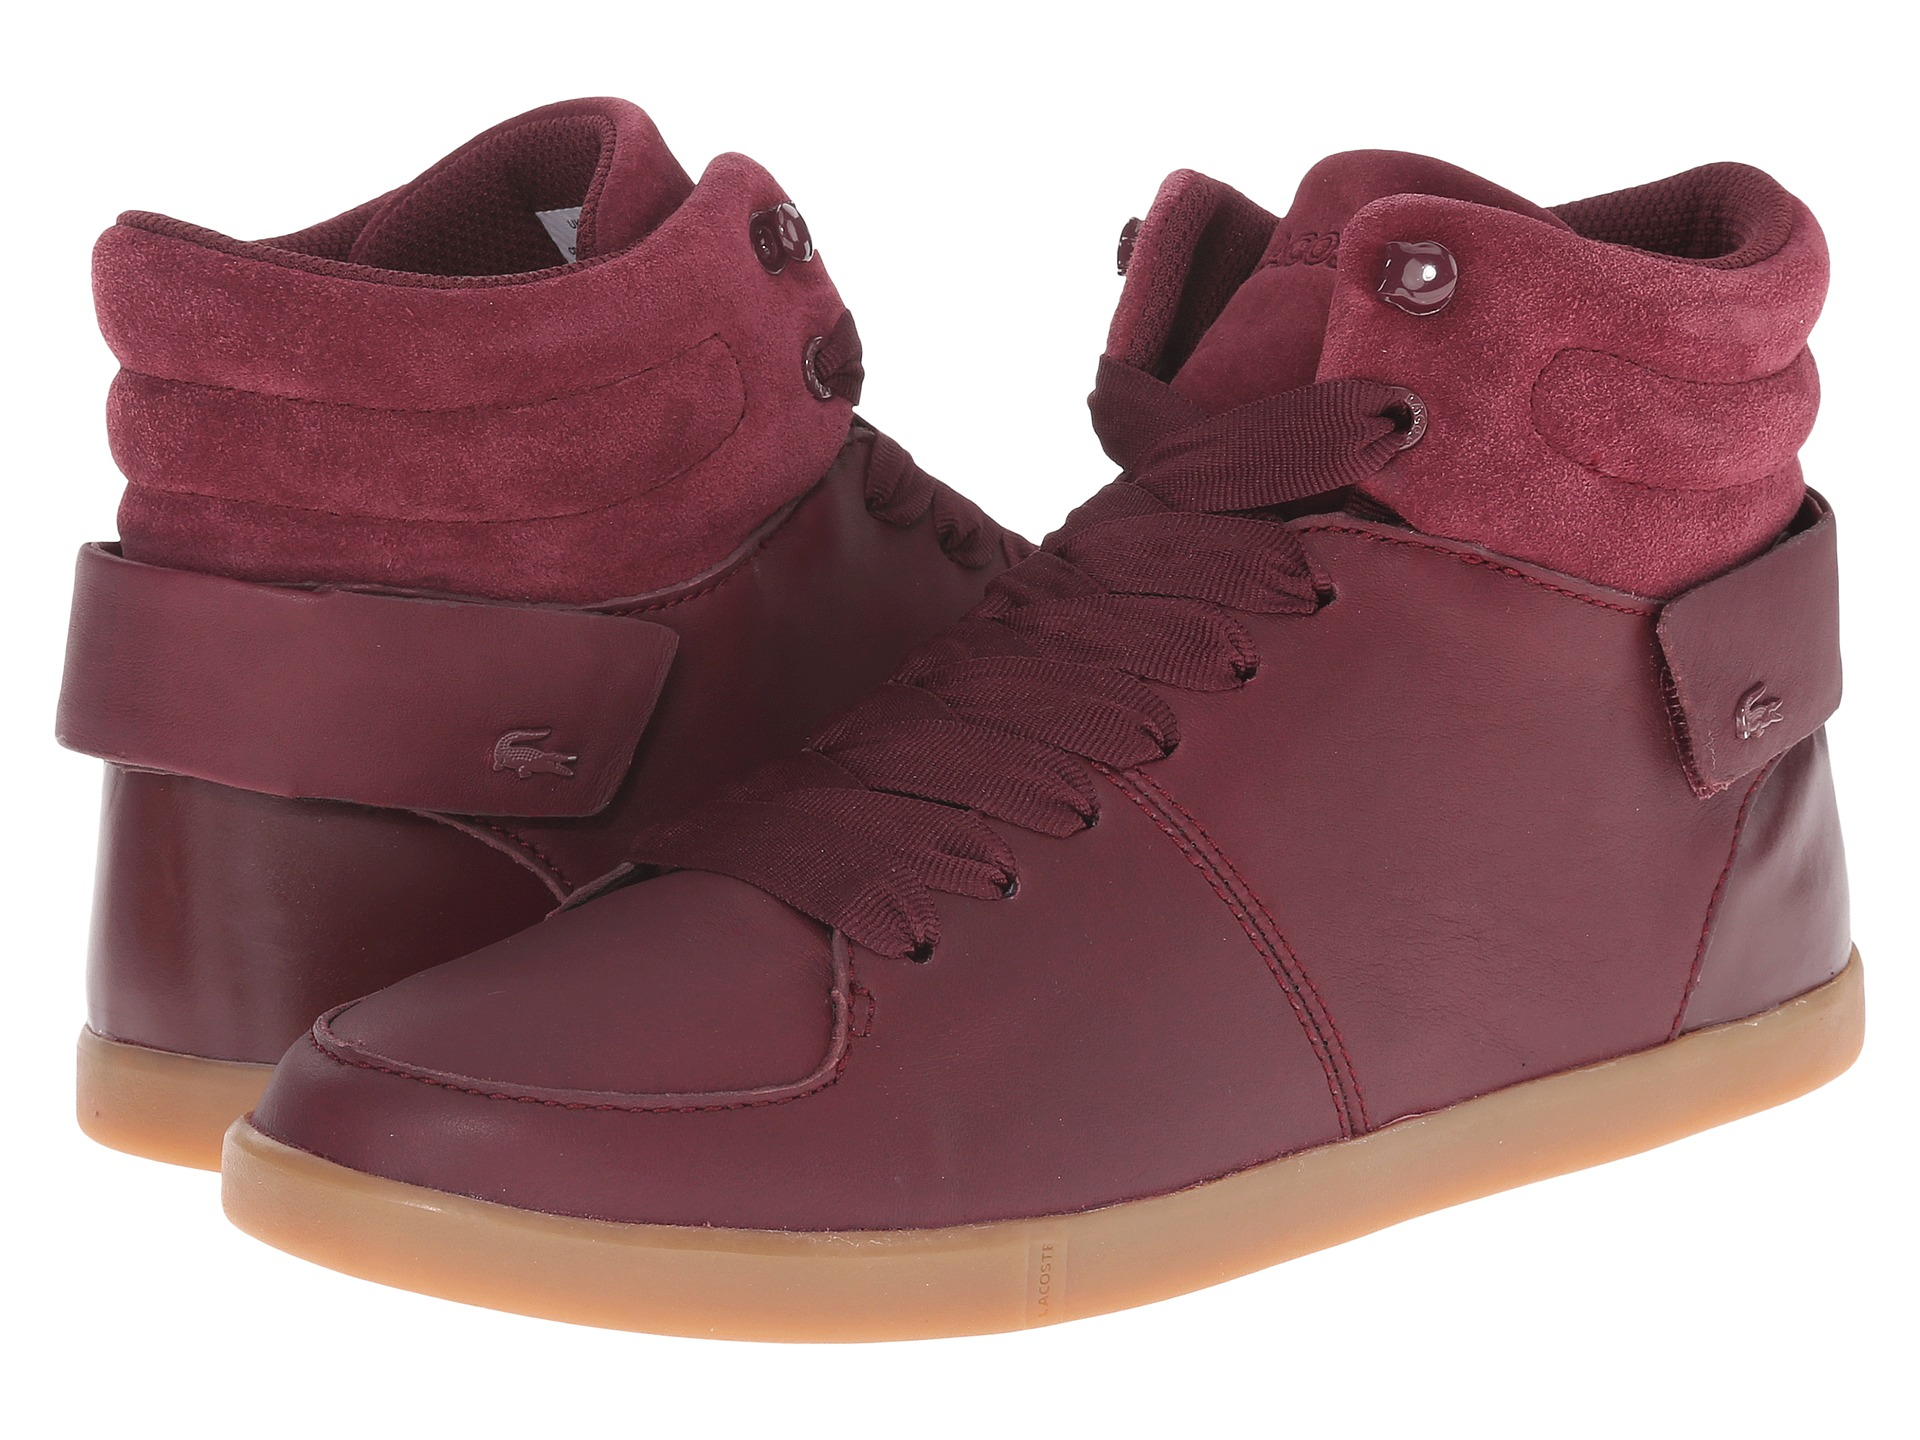 burgundy lacoste shoes